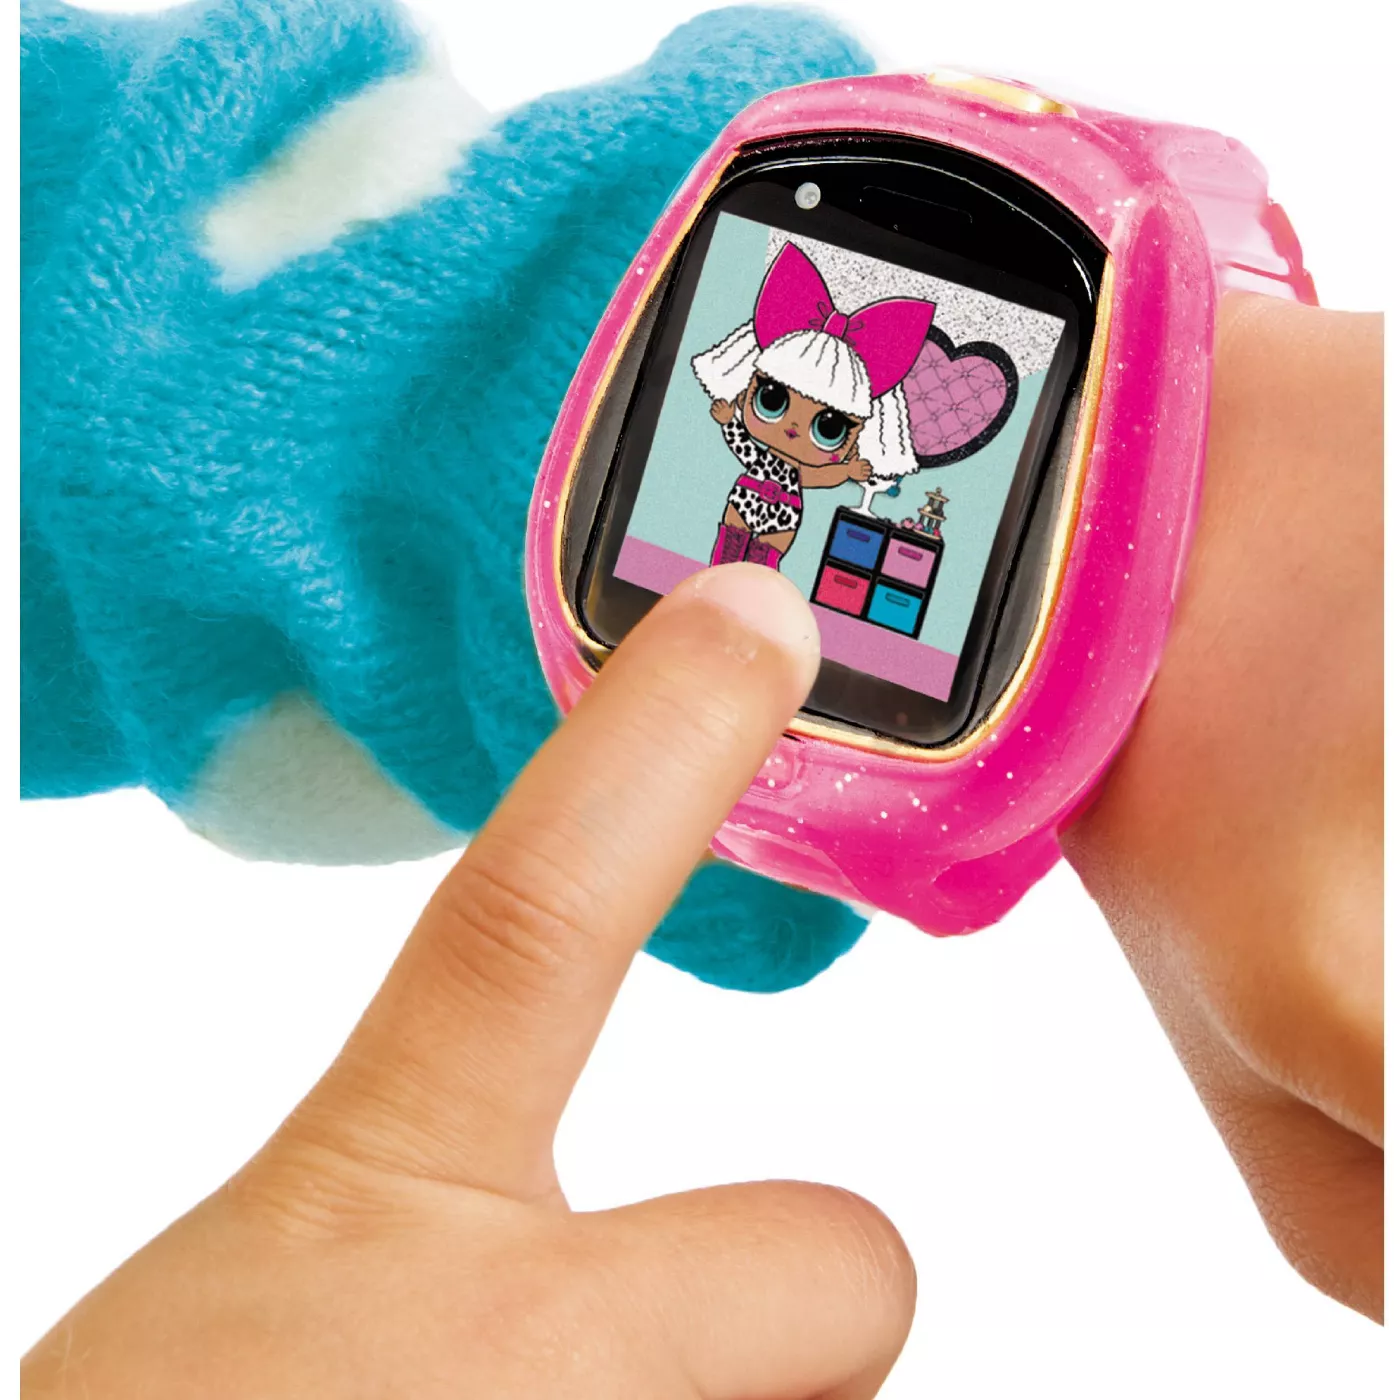 L.O.L. Surprise! Smartwatch! Pink -  Camera, Video, Games, Activities and More - £15.64 GBP